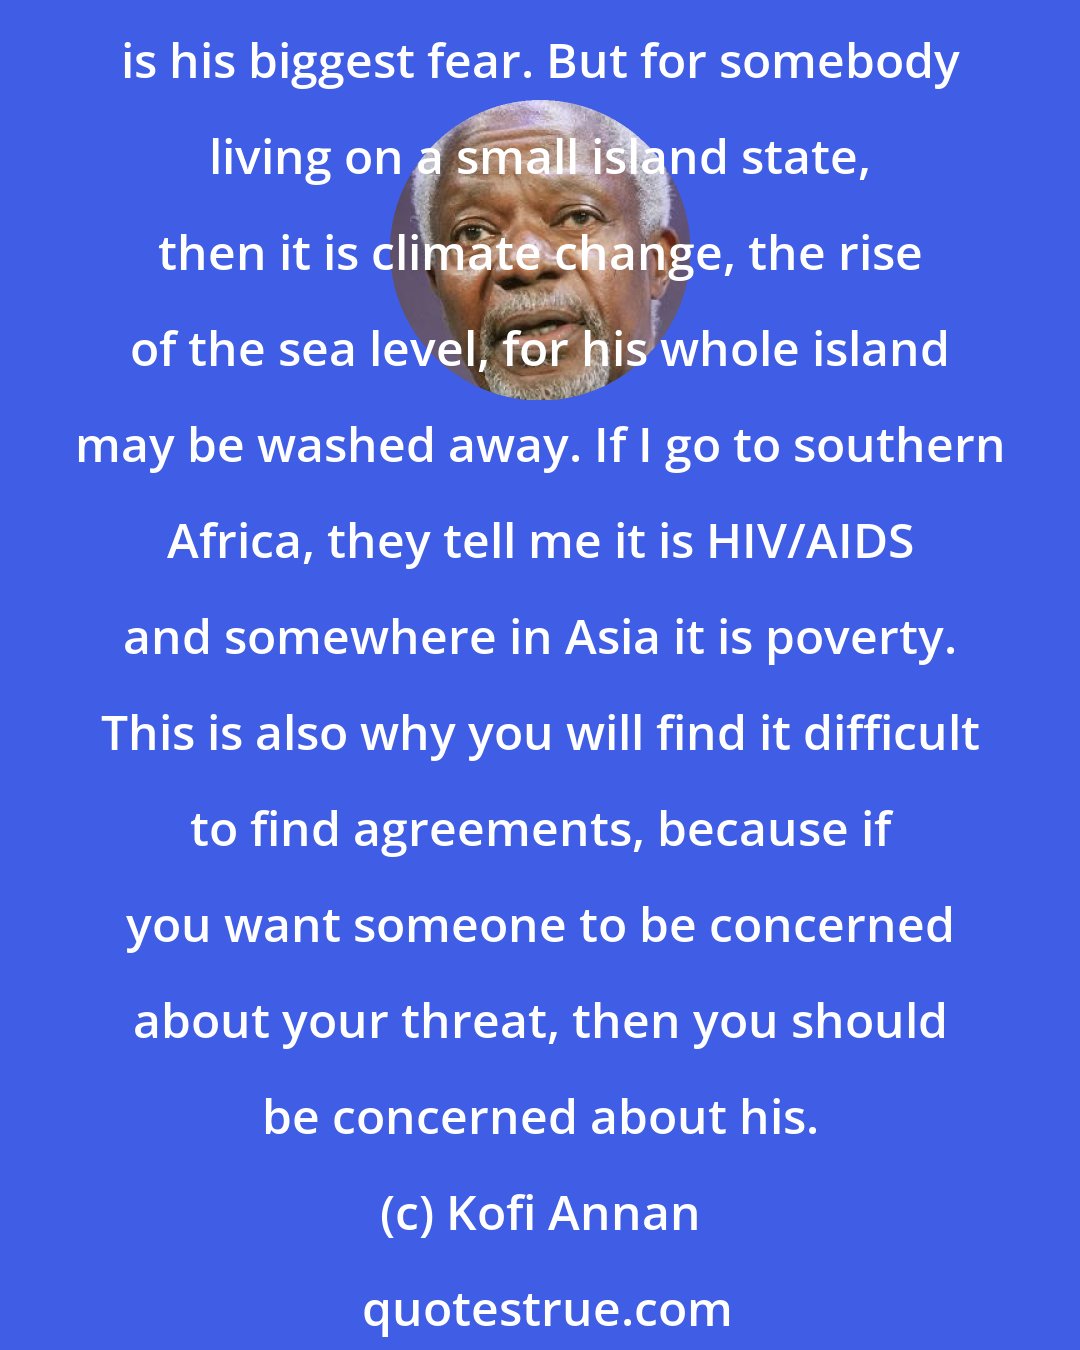 Kofi Annan: Depending on where you live, your threat is much different from the other person. If you ask a New Yorker today, because of the way the press plays it, he will say terrorism is his biggest fear. But for somebody living on a small island state, then it is climate change, the rise of the sea level, for his whole island may be washed away. If I go to southern Africa, they tell me it is HIV/AIDS and somewhere in Asia it is poverty. This is also why you will find it difficult to find agreements, because if you want someone to be concerned about your threat, then you should be concerned about his.